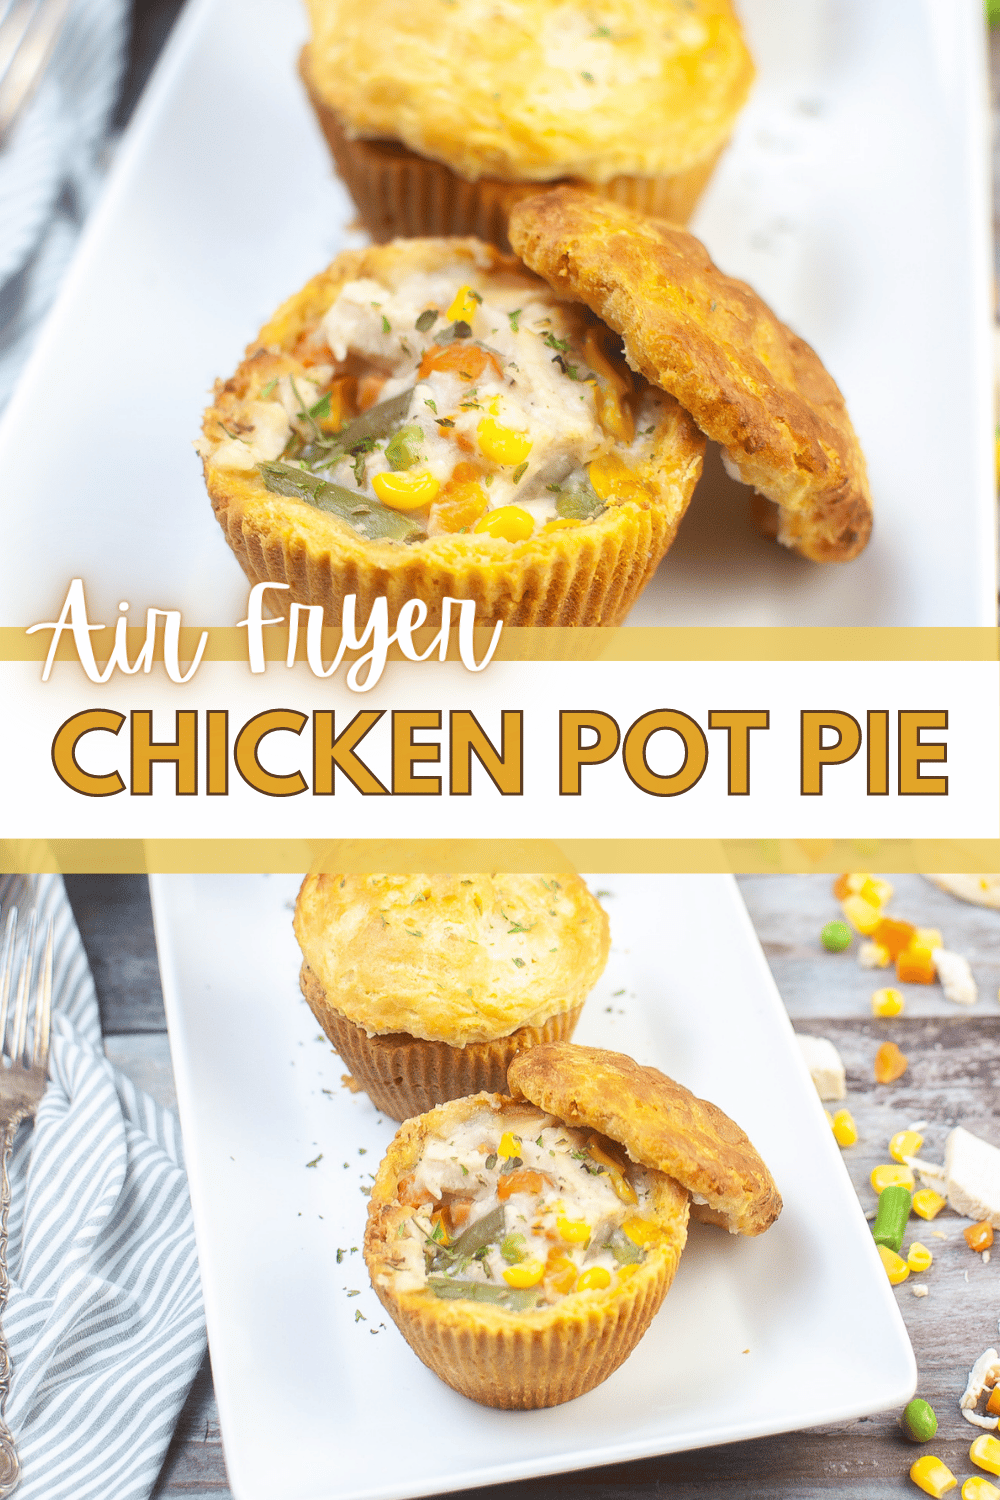 This Air Fryer Chicken Pot Pie is a quick and easy weeknight meal that the whole family will love. It can be on the table in under an hour. #airfryerchickenpotpie #airfryer #chickenpotpie #chicken #potpie via @wondermomwannab